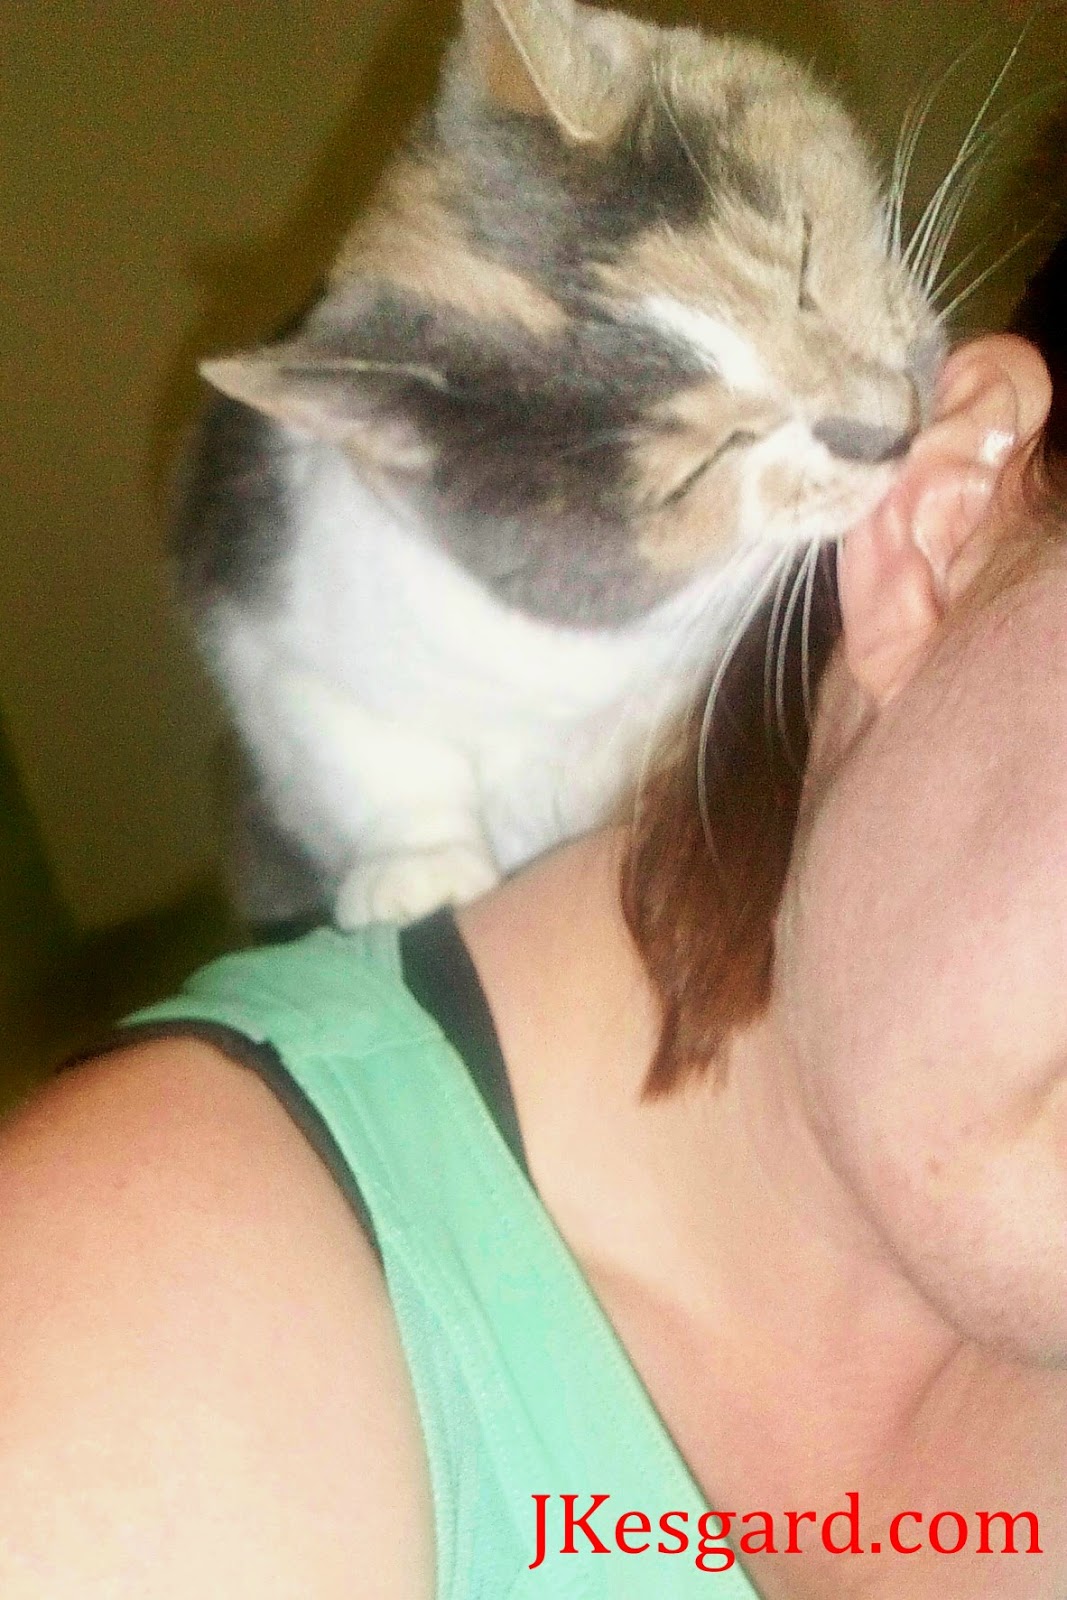 My calico cat is biting through my ear